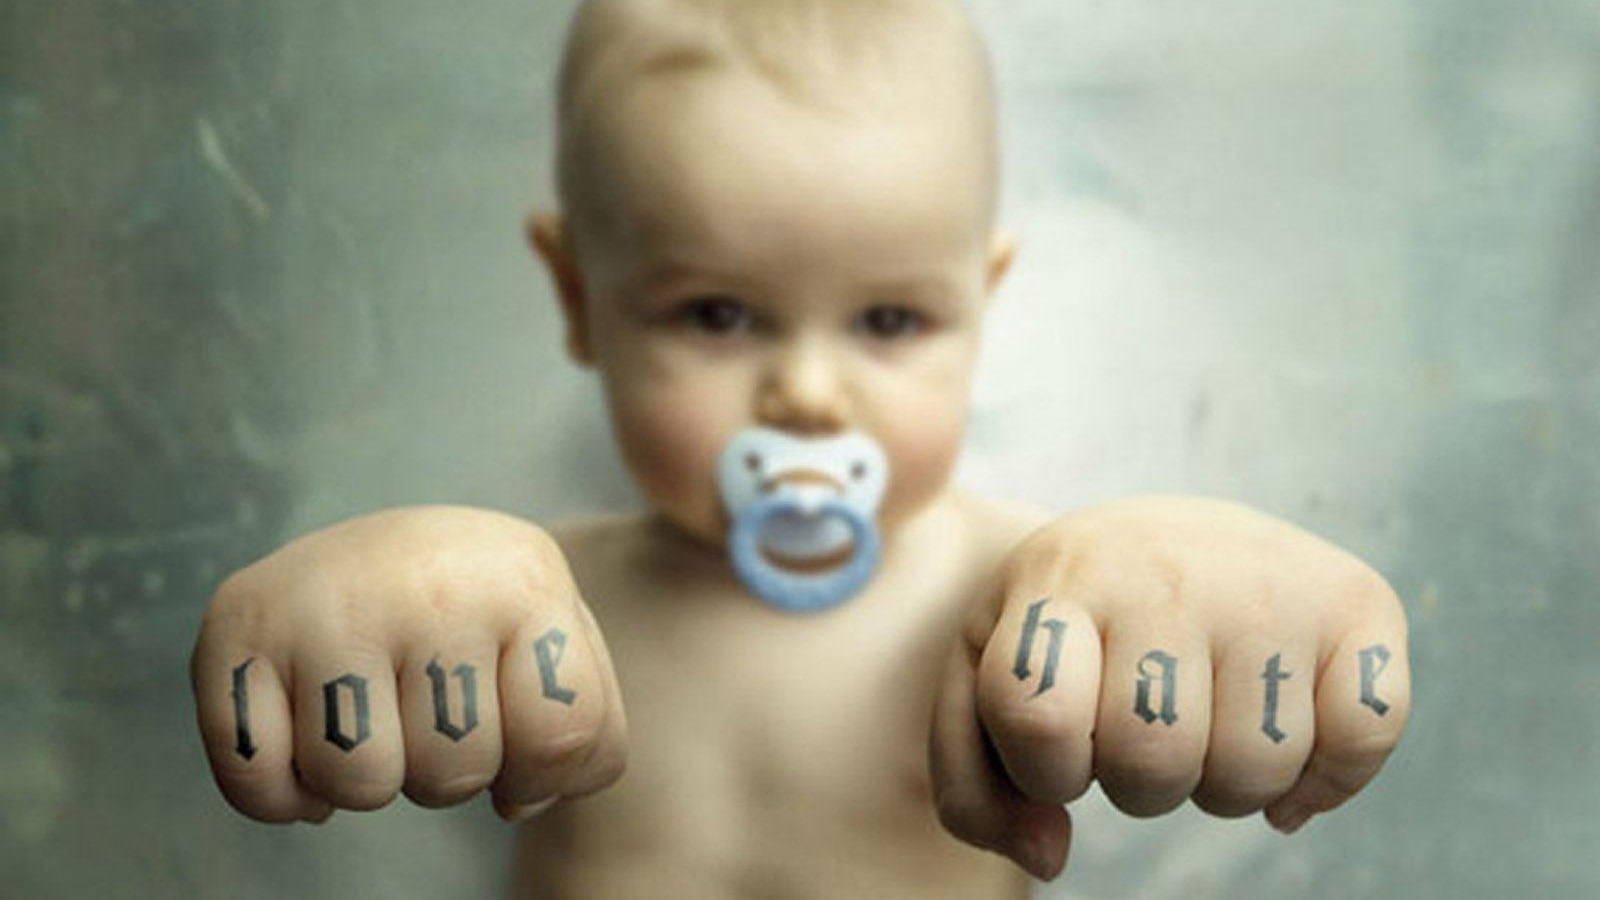 "Humorous shot of Baby with Tattooed Fist - adding a punch of fun to innocence." Wallpaper